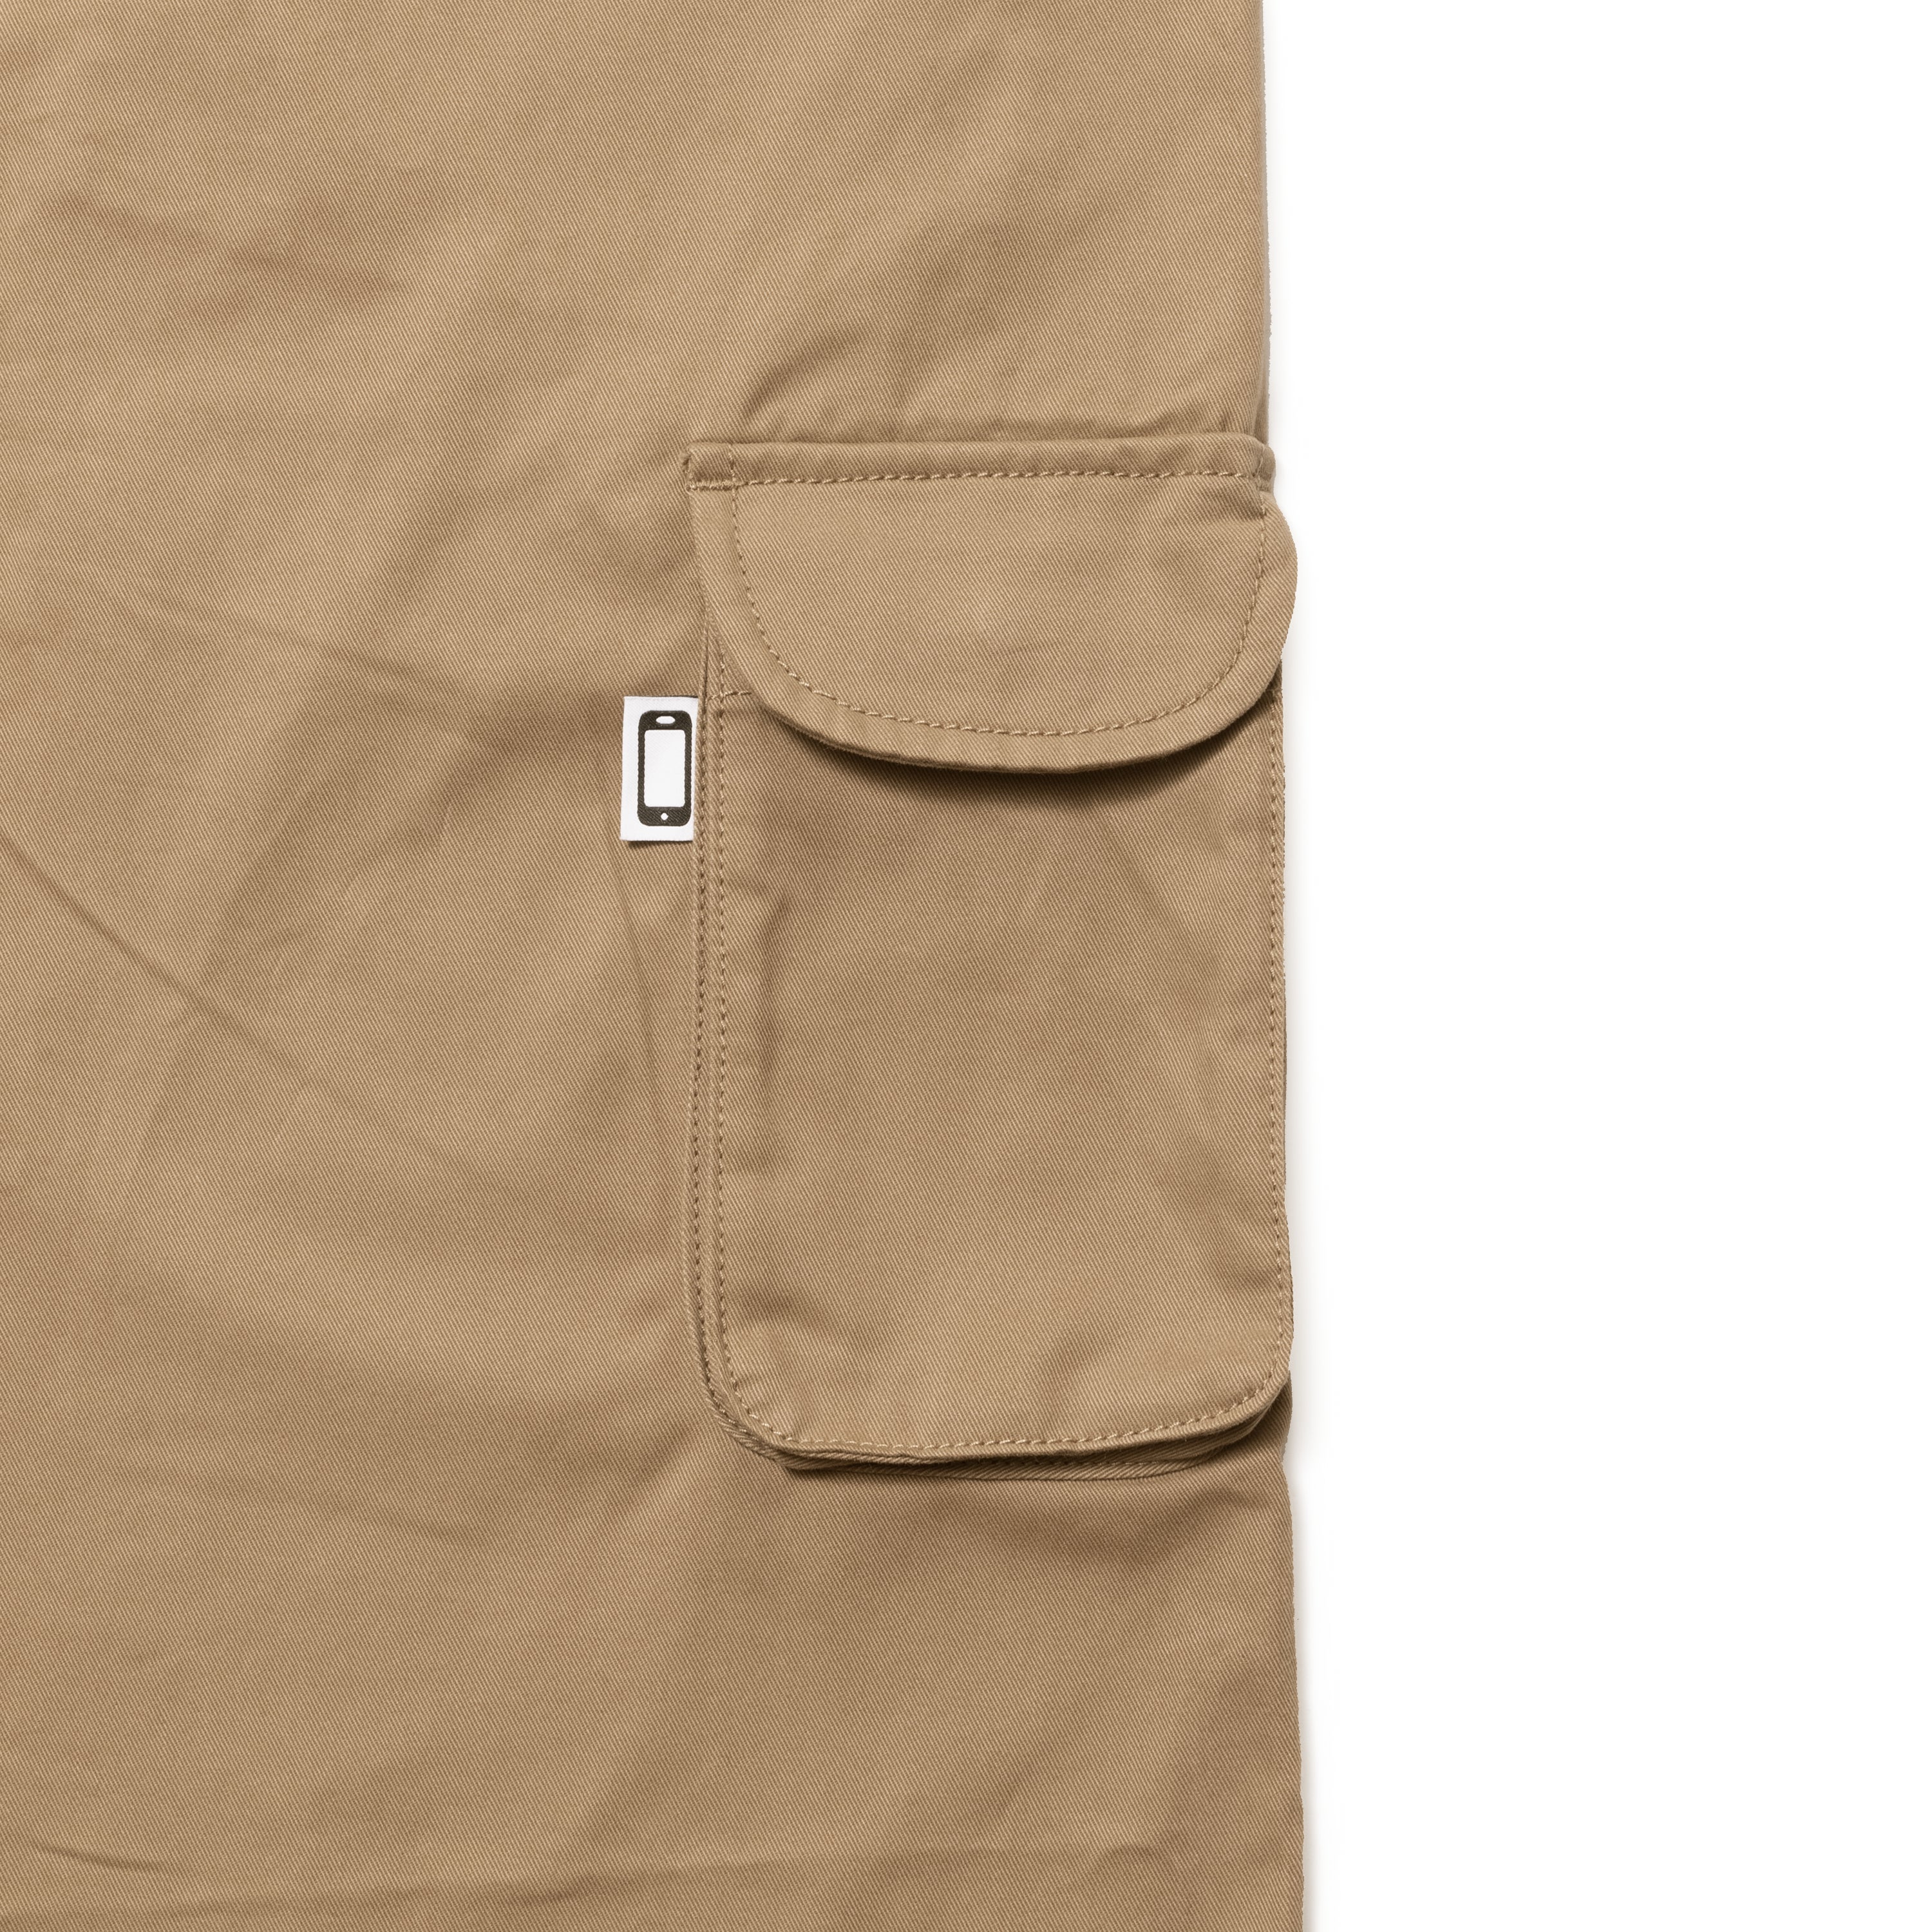 Cellphone Pocket Chino Trousers[CAMEL]